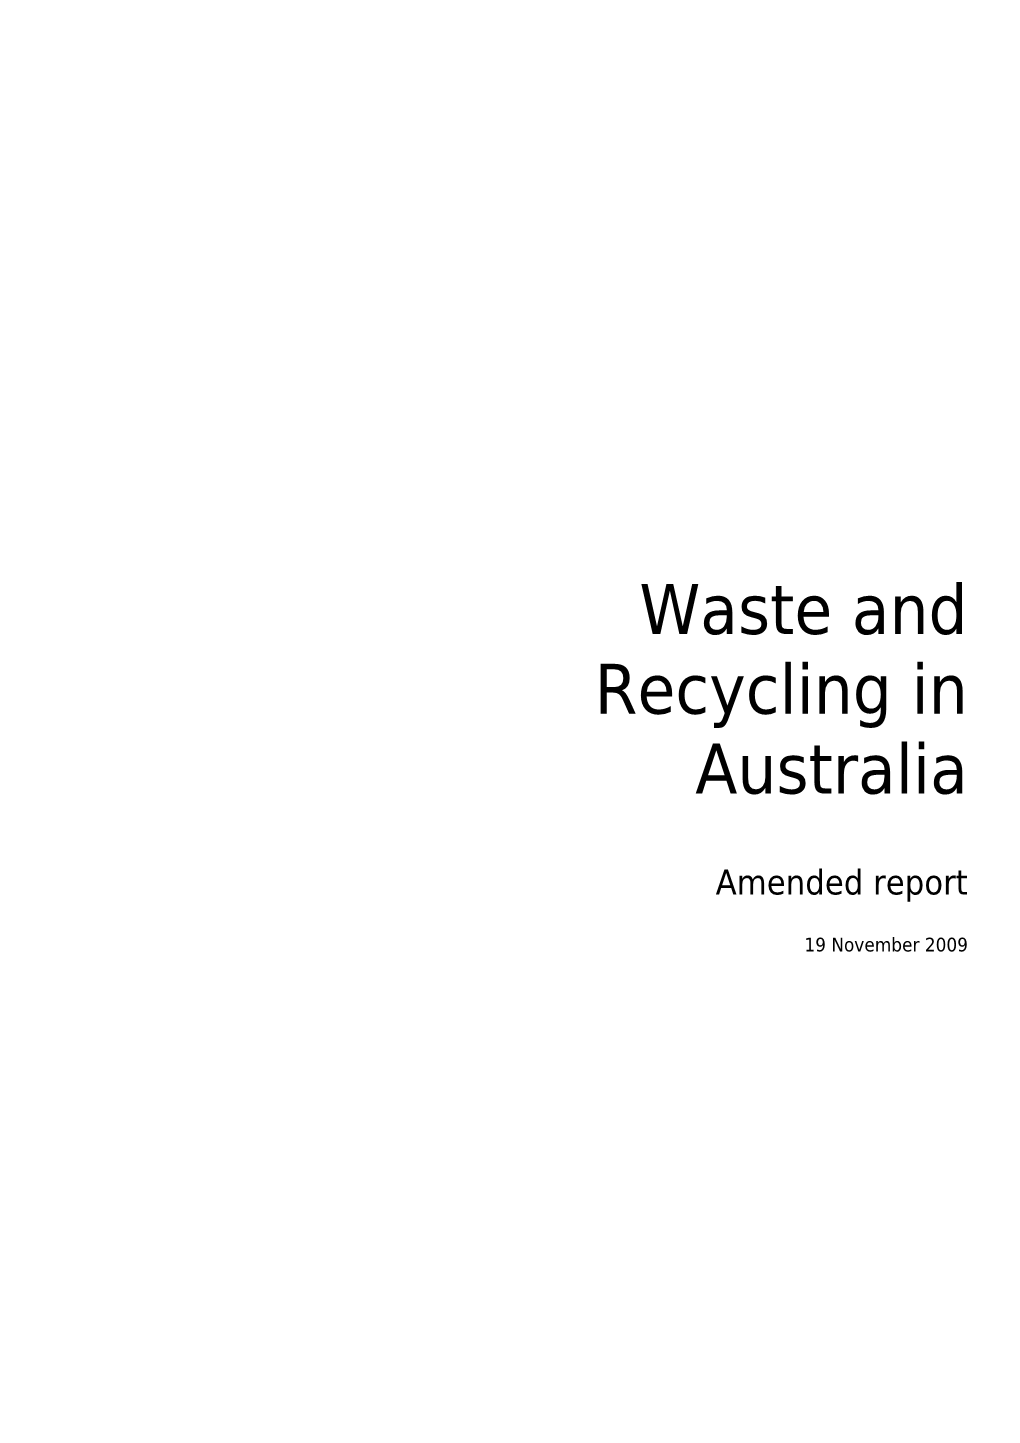 Waste and Recycling in Australia - Amended Report - 19 November 2009